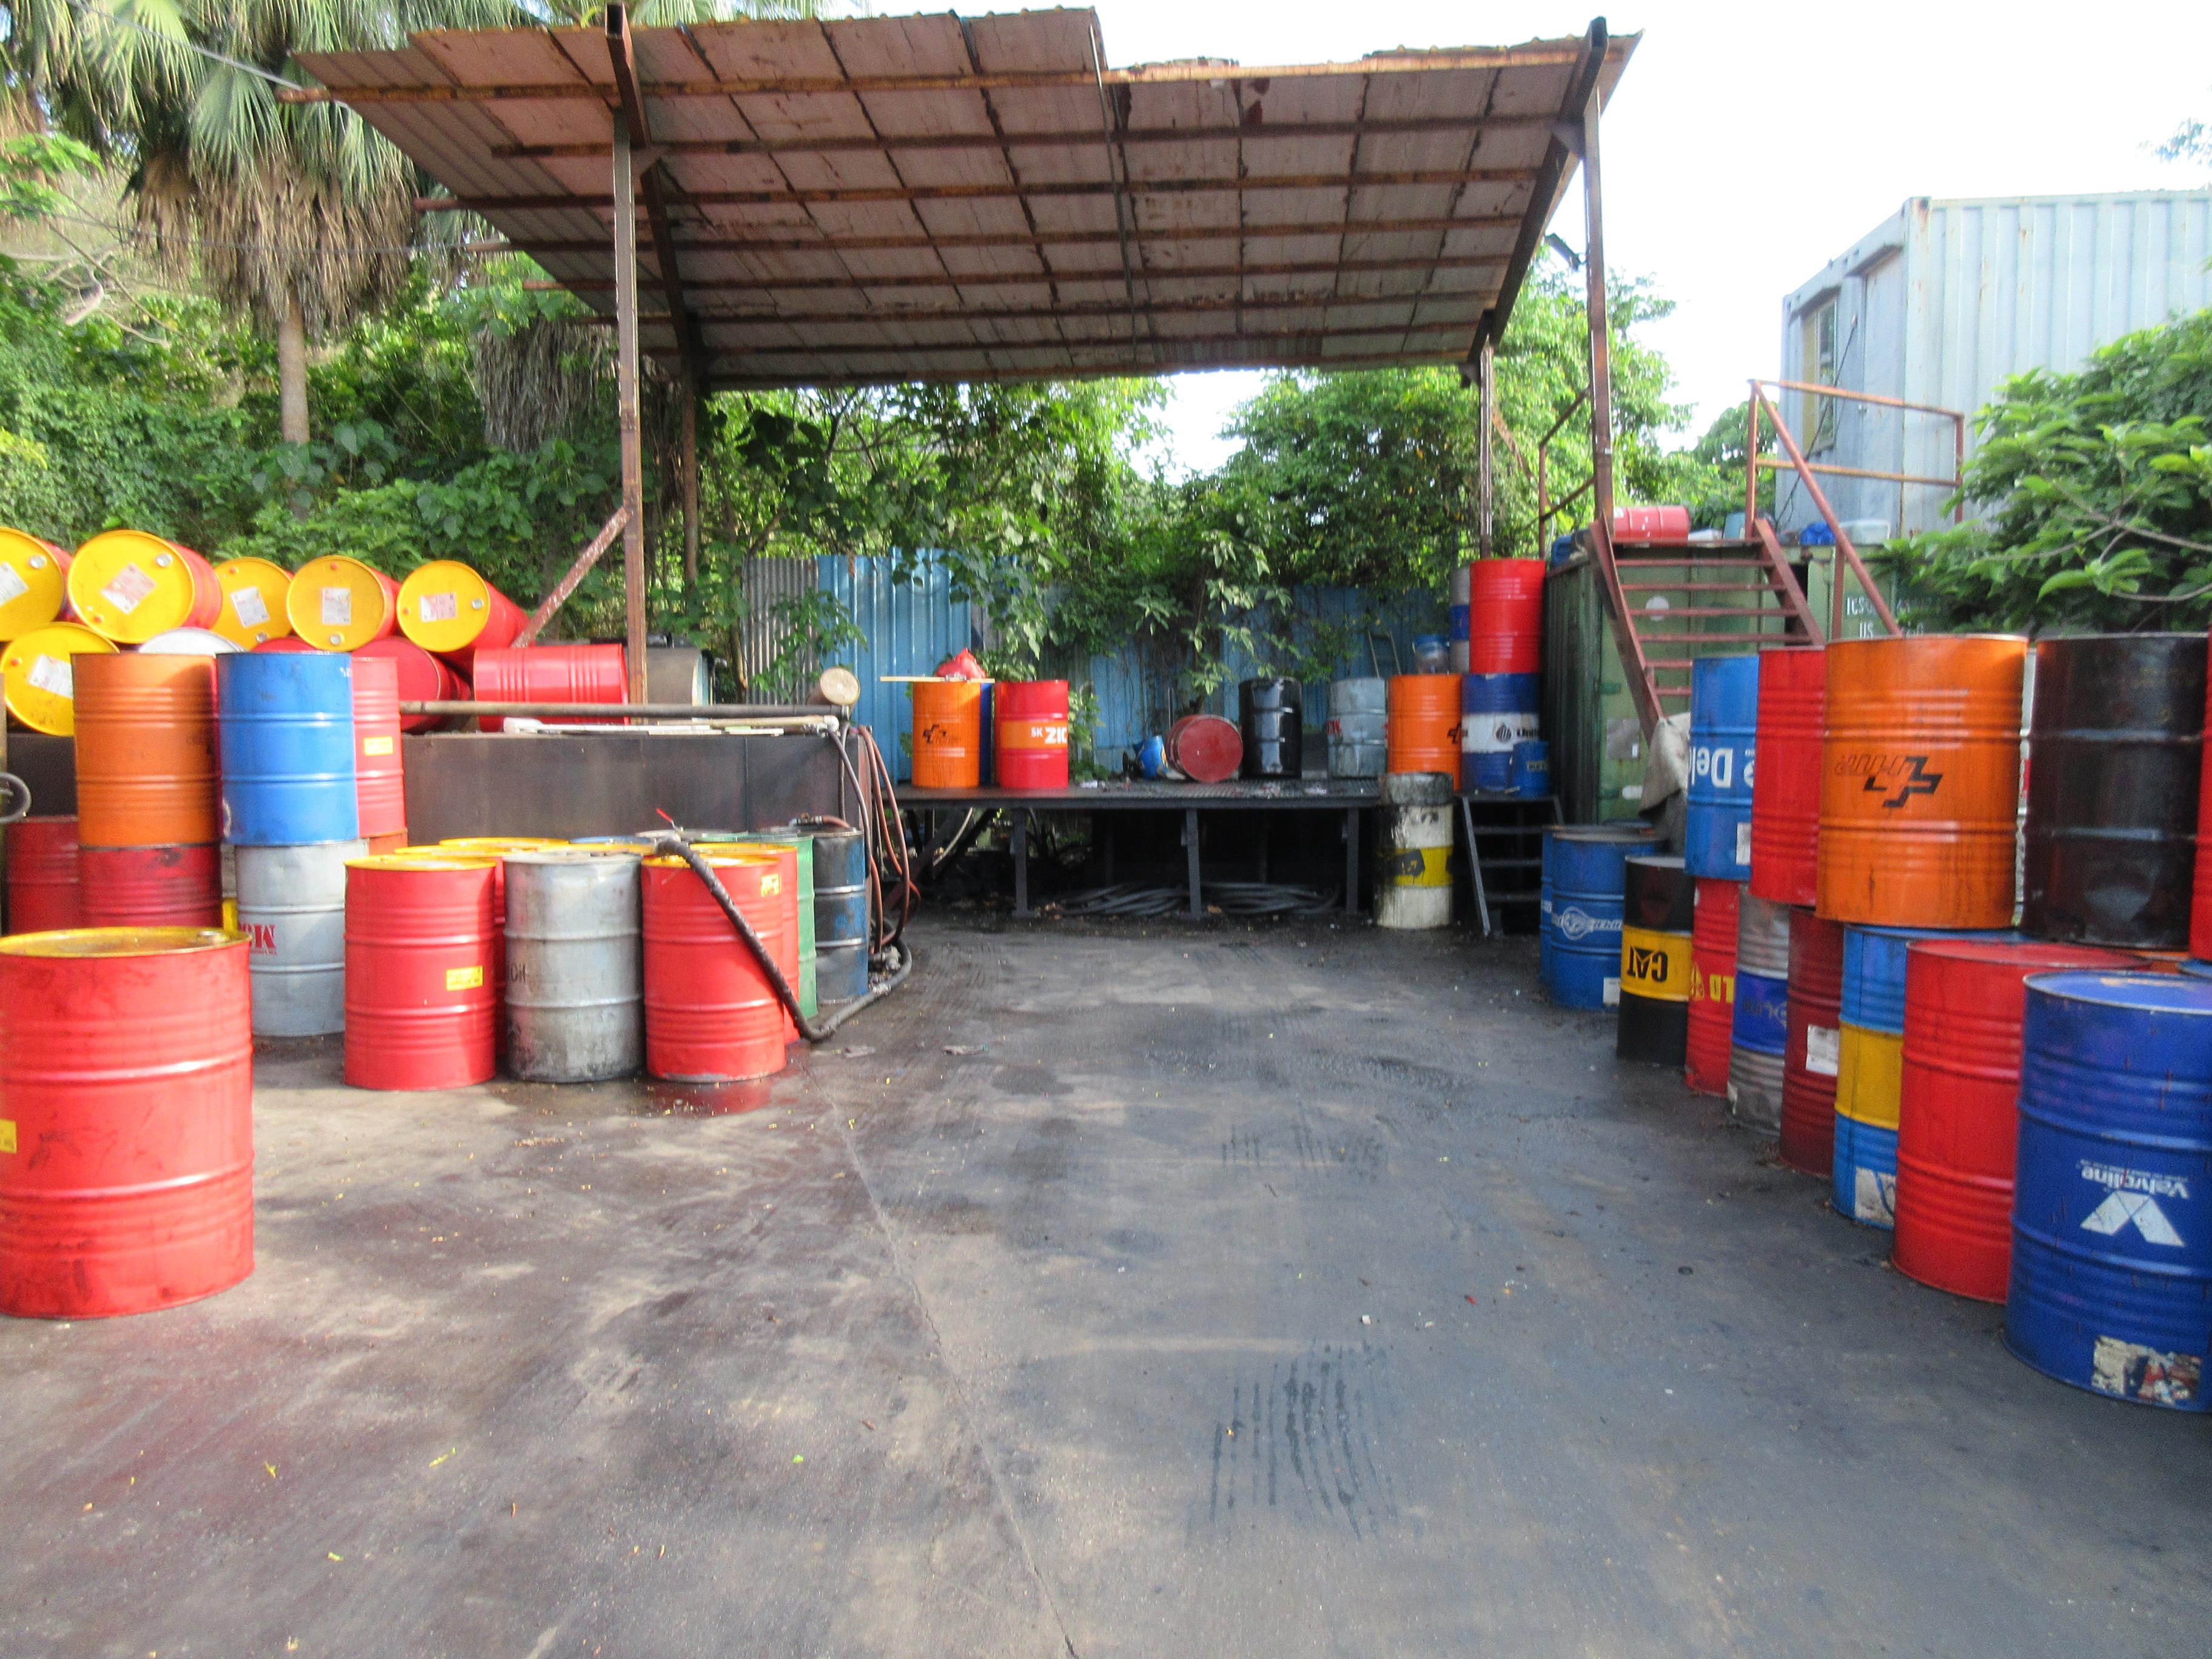 An unlicensed collector and a person-in-charge of an open-air storage site were convicted and fined a total of $13,500 at Fanling Magistrates' Courts today (January 4) for contravening the Waste Disposal Ordinance and the Waste Disposal (Chemical Waste) (General) Regulation respectively by illegally collecting and handling spent lubricating oil. Picture shows part of the spent lubricating oil seized in the case.